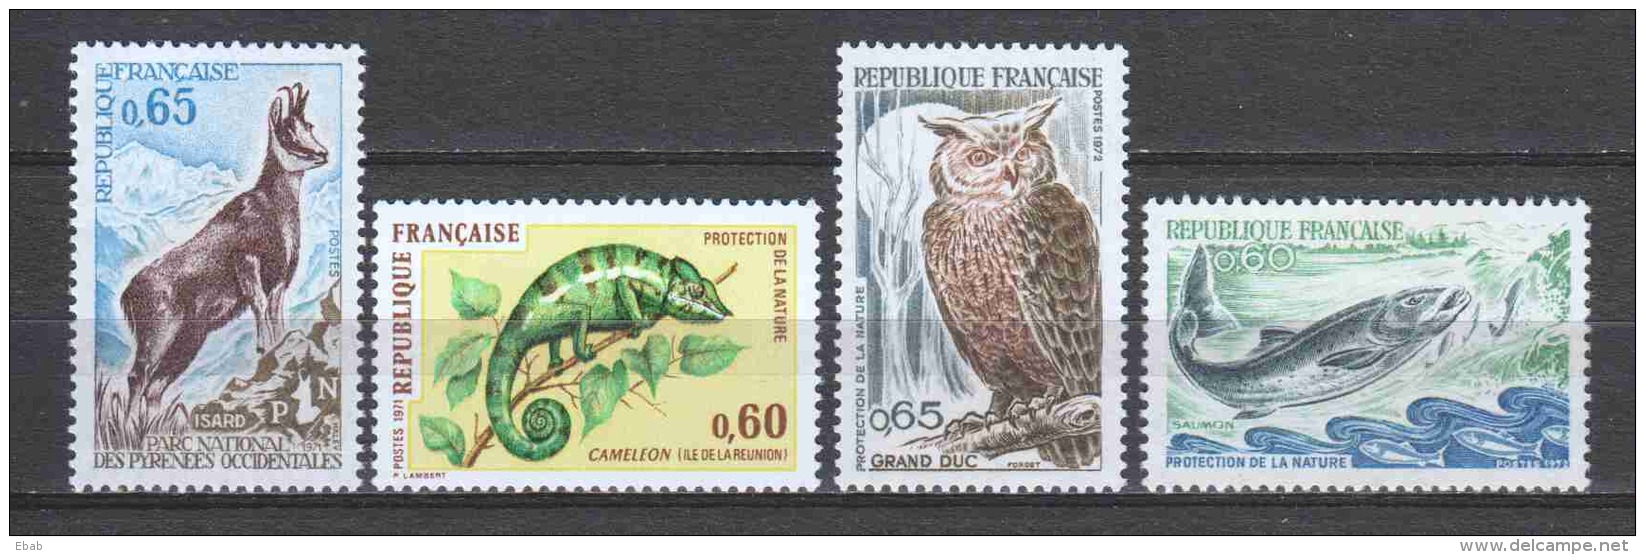 France 1971-1972 Various Issues MNH ANIMALS - Unused Stamps